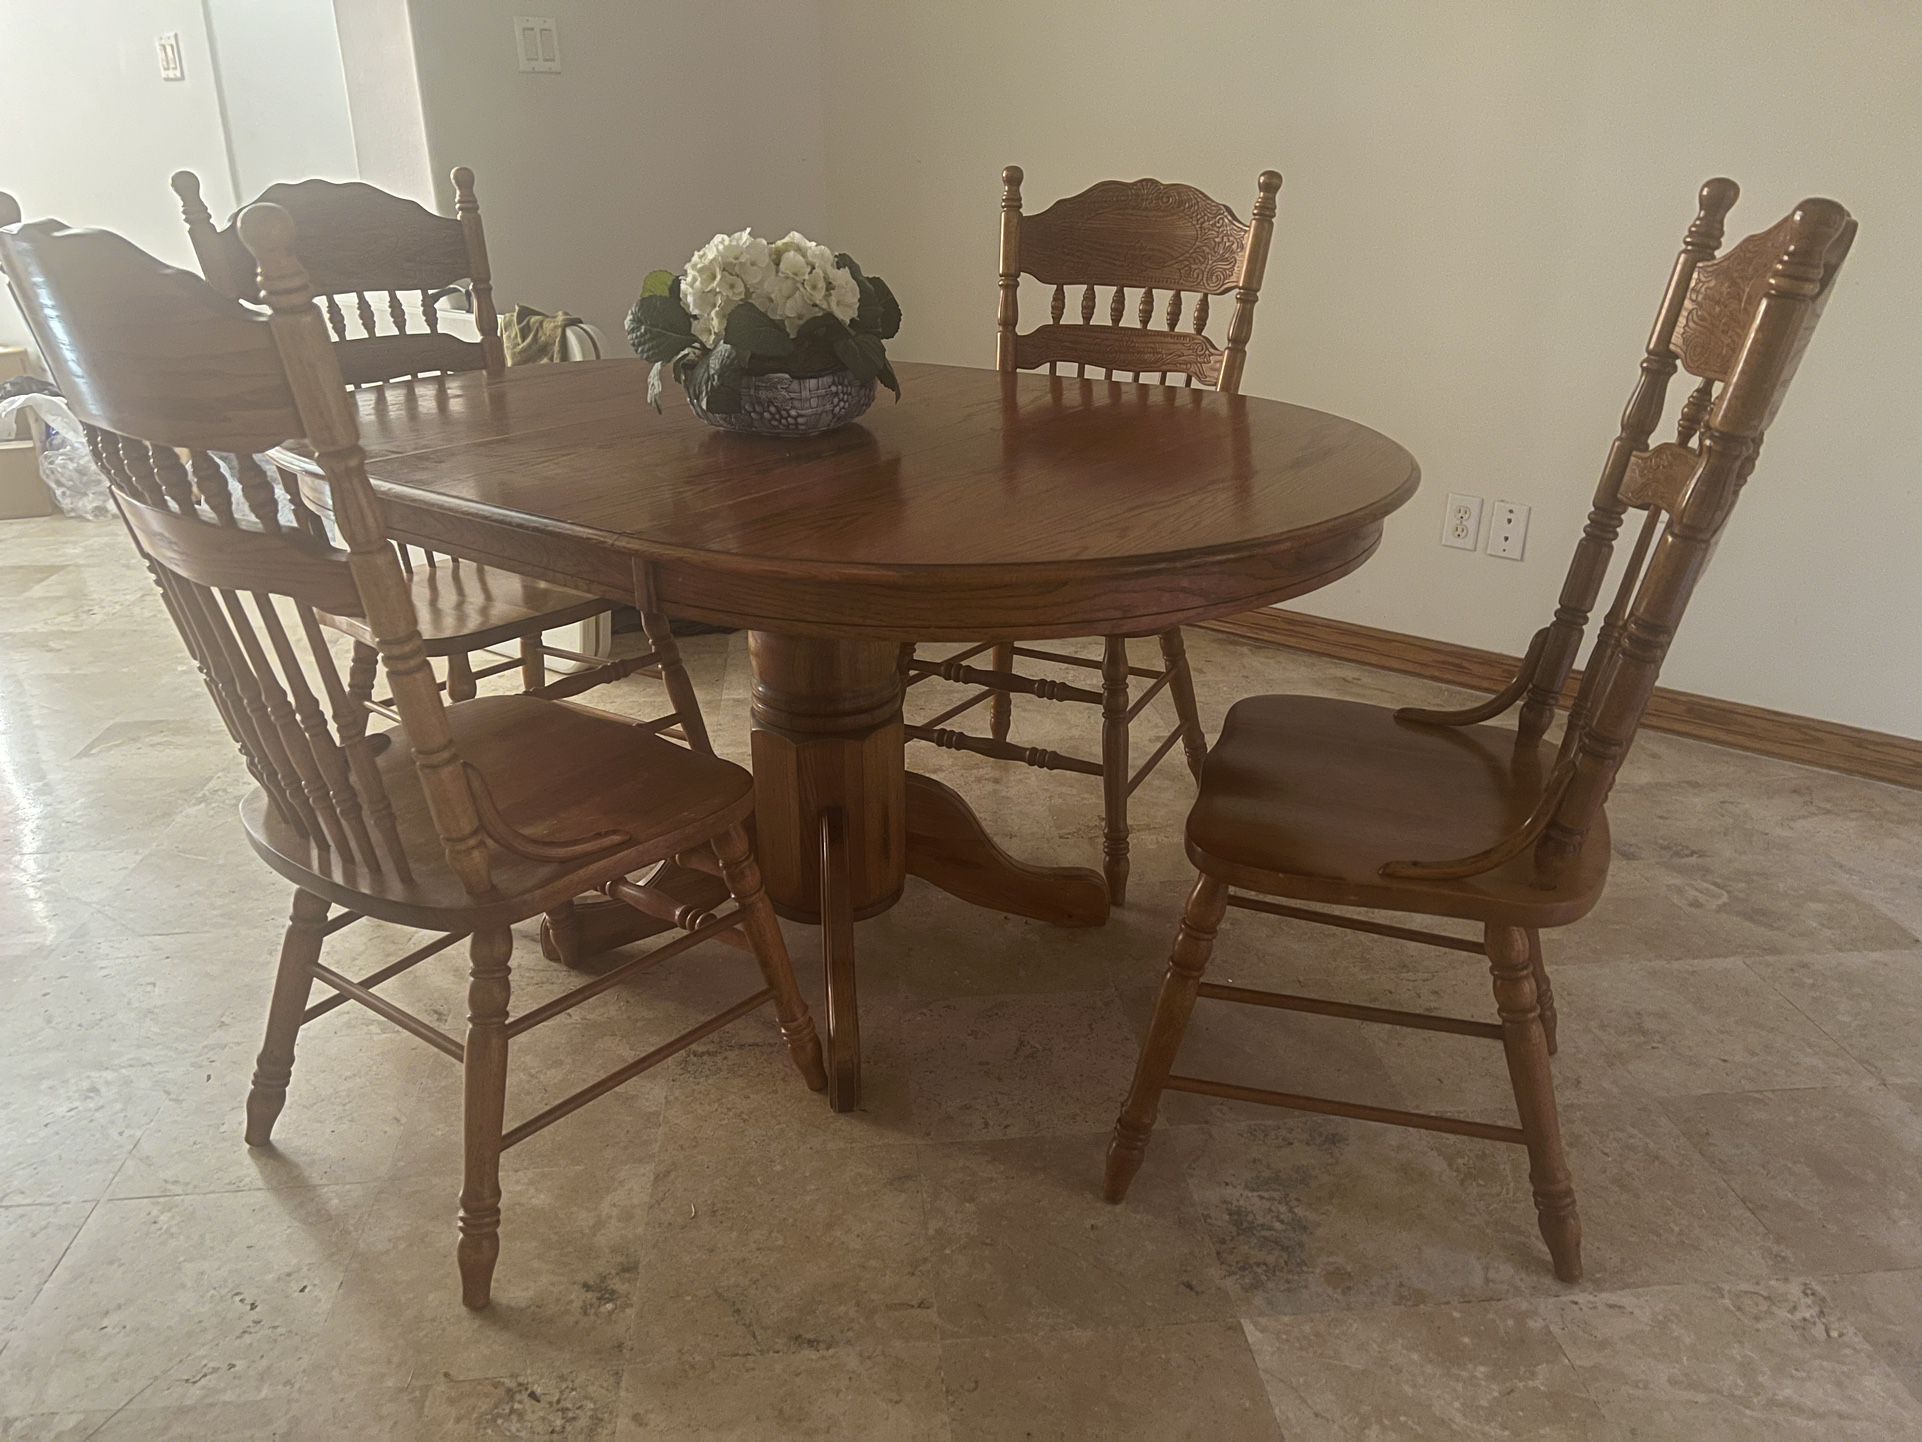 Oak Table With 4 Chairs